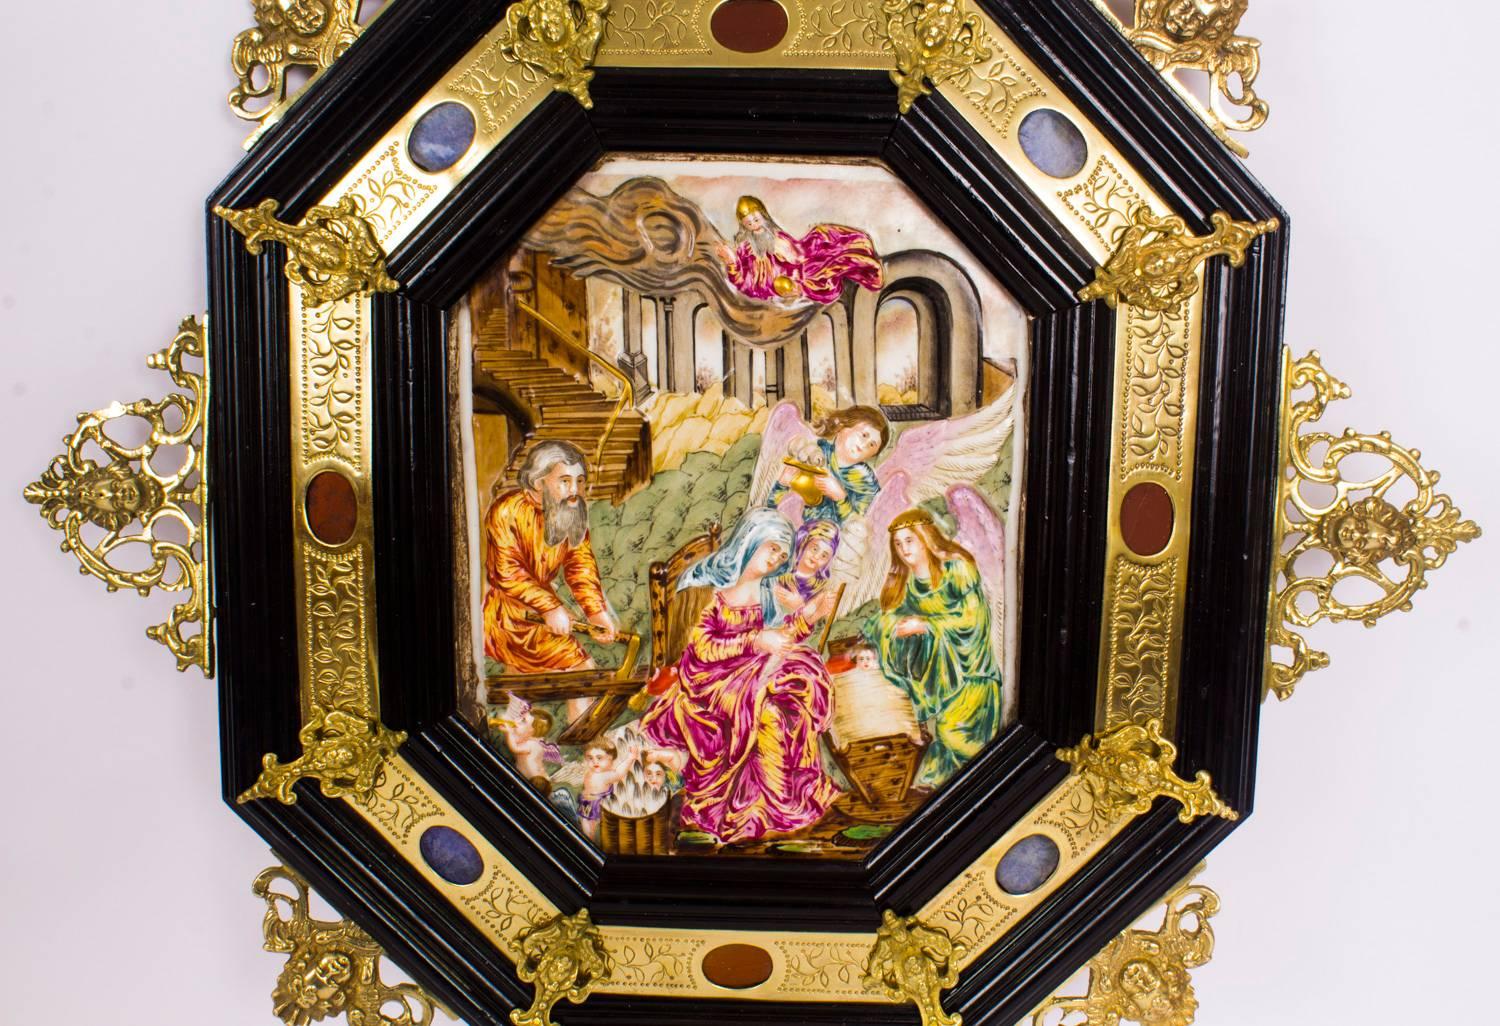 This is a beautiful large antique Italian Capodimonte porcelain plaque, circa 1820 in date. 

The plaque is housed in a decorative ebonized frame that has a plethora of ormolu mounts that are inset with semi precious stones including lapislazuli